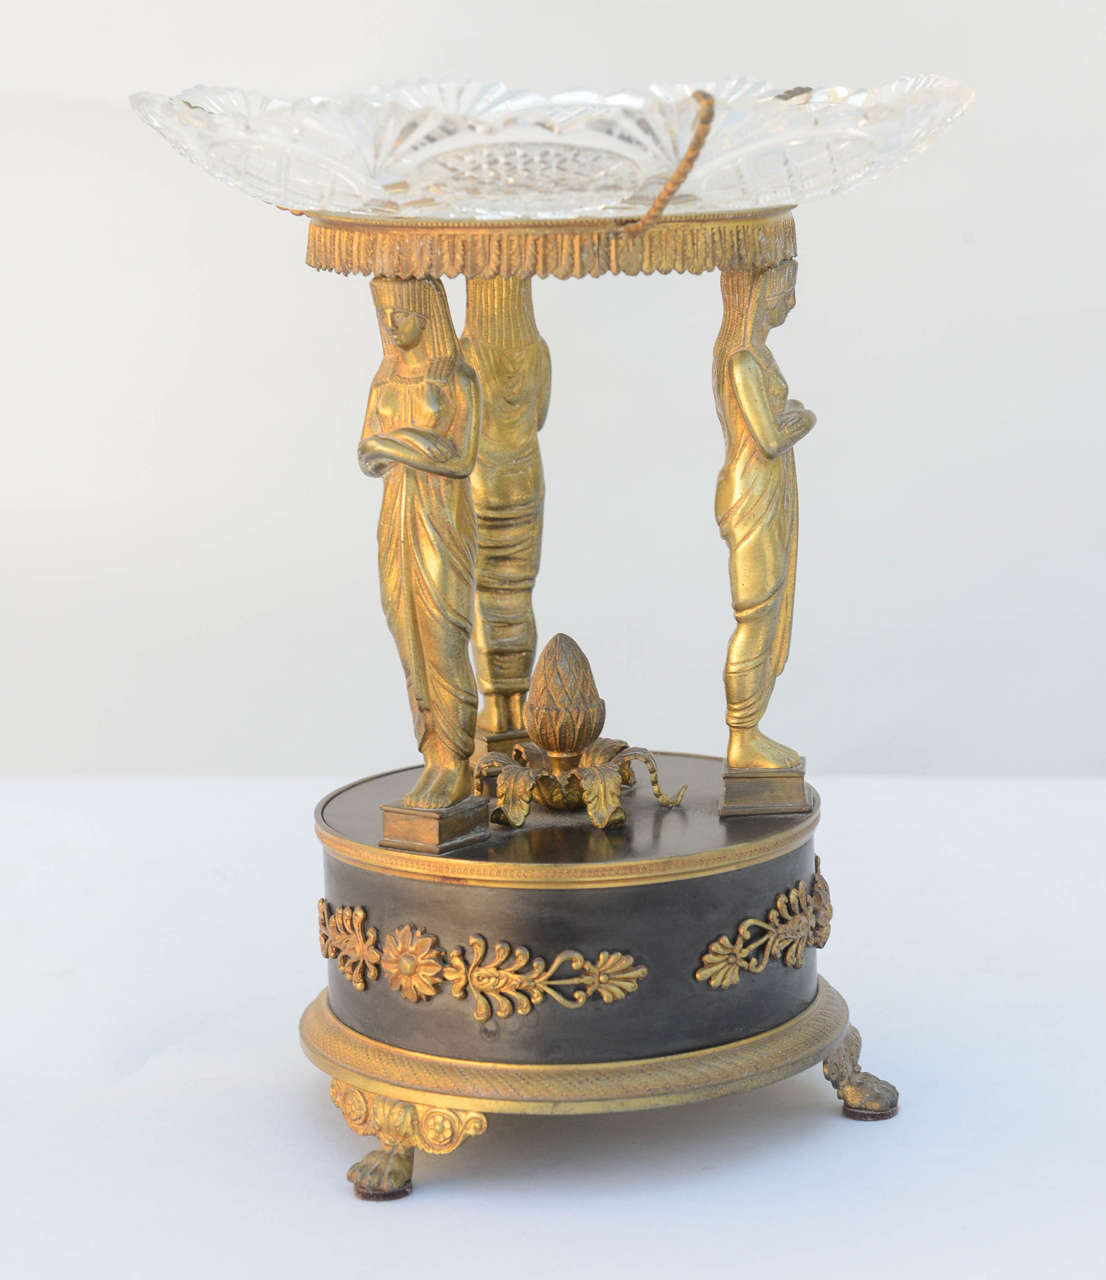 Fine period Empire tazza, having a bowl of cut lead crystal supported by a trio of caryatids standing on a round plinth decorated with anthemion flanked rosettes, over chased bronze base, raised on paw feet.

Stock ID: D6233